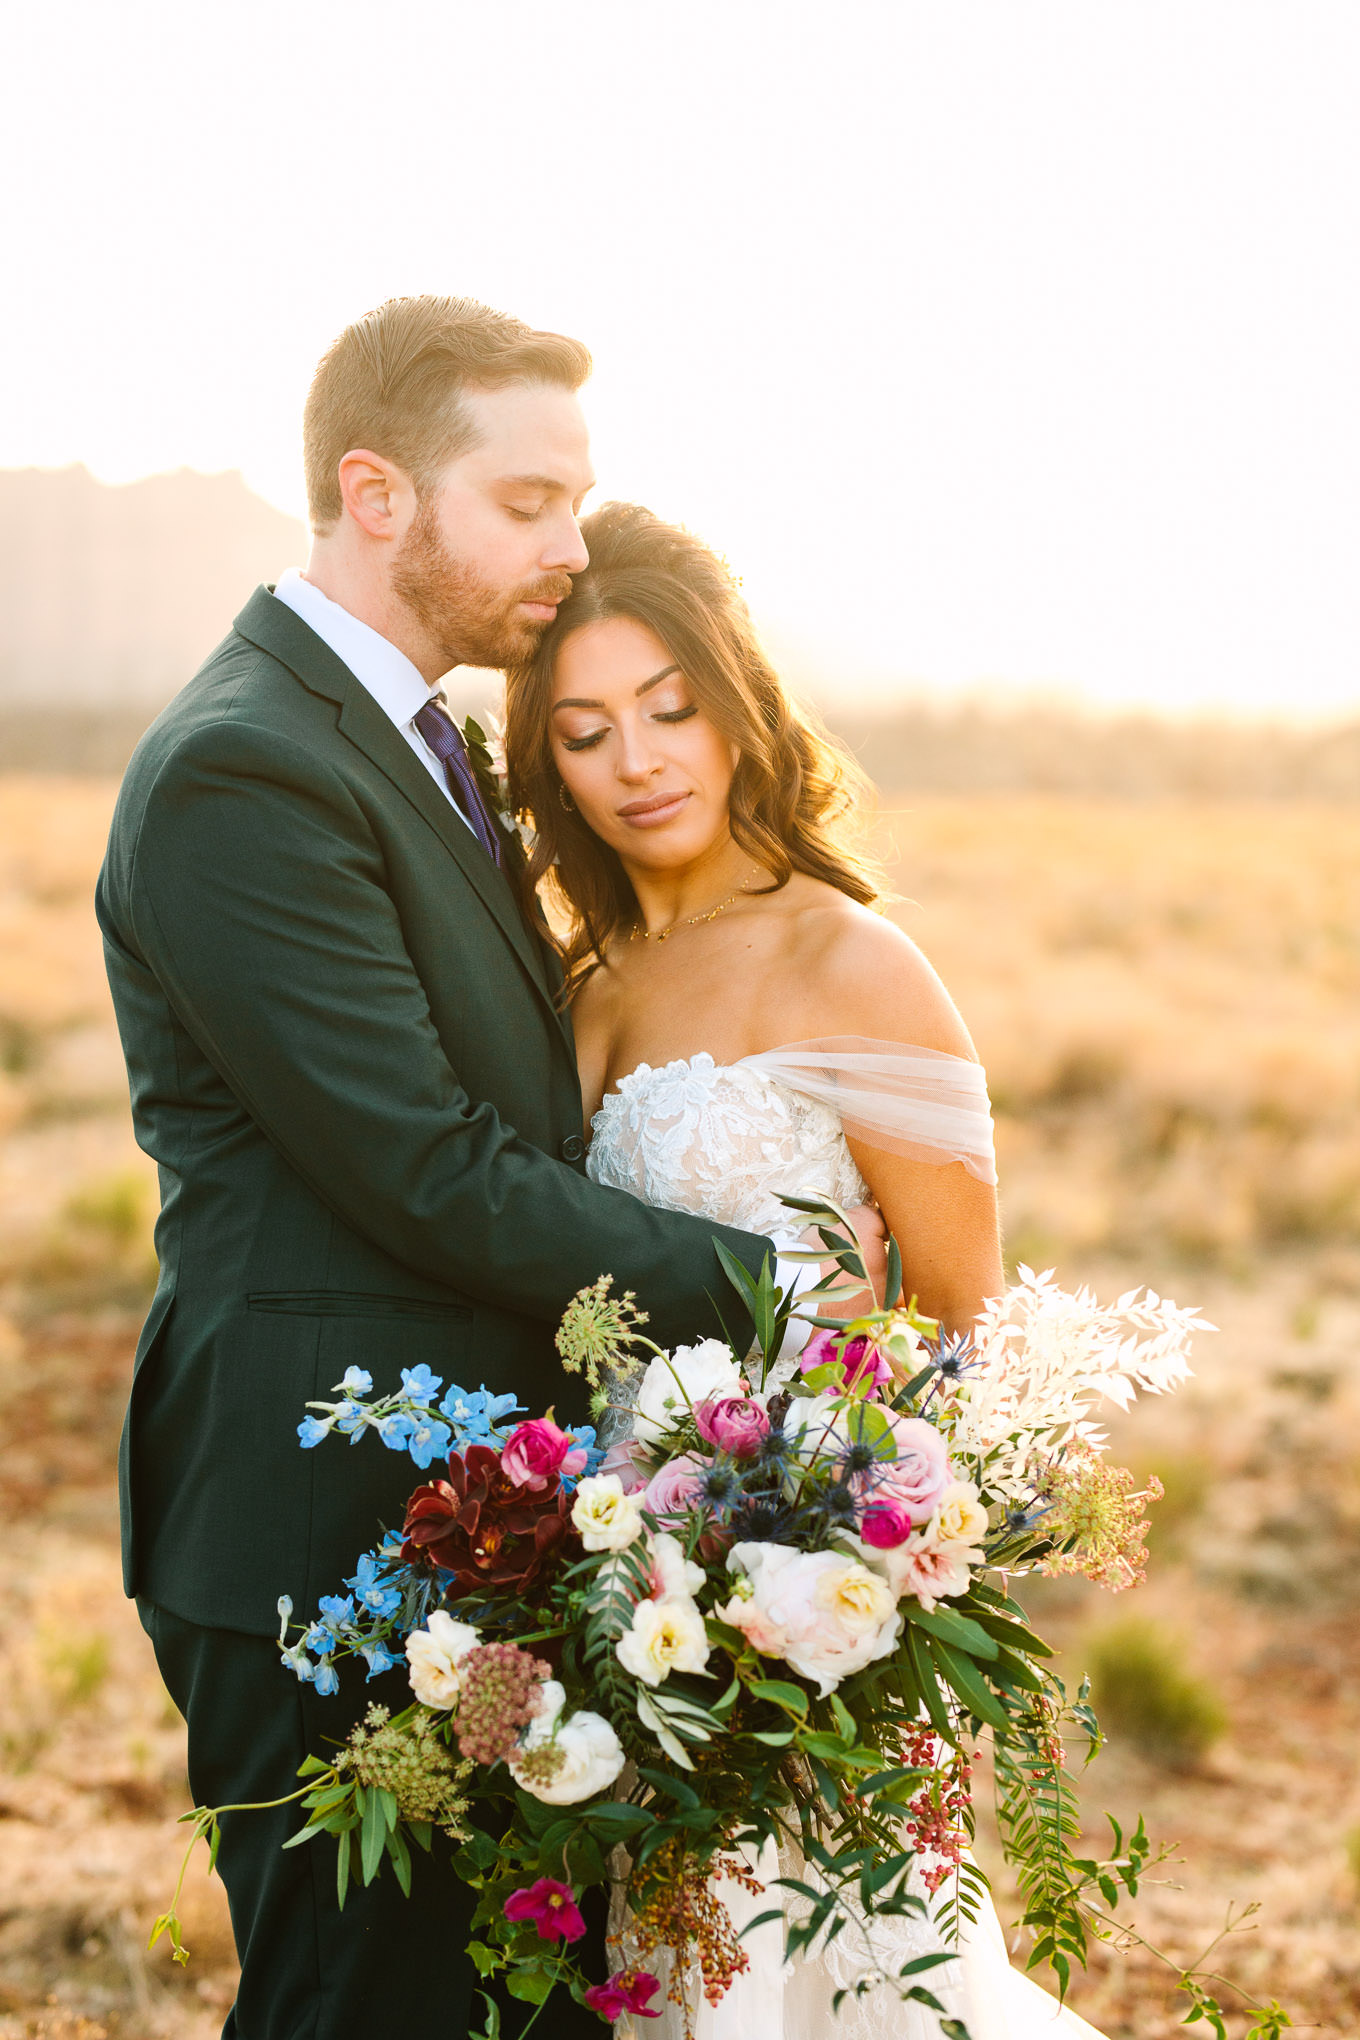 Bride with groom in green suit portraits | Zion Under Canvas camping elopement at sunrise | Colorful elopement photography | #utahelopement #zionelopement #zionwedding #undercanvaszion #sunriseelopement #adventureelopement  Source: Mary Costa Photography | Los Angeles